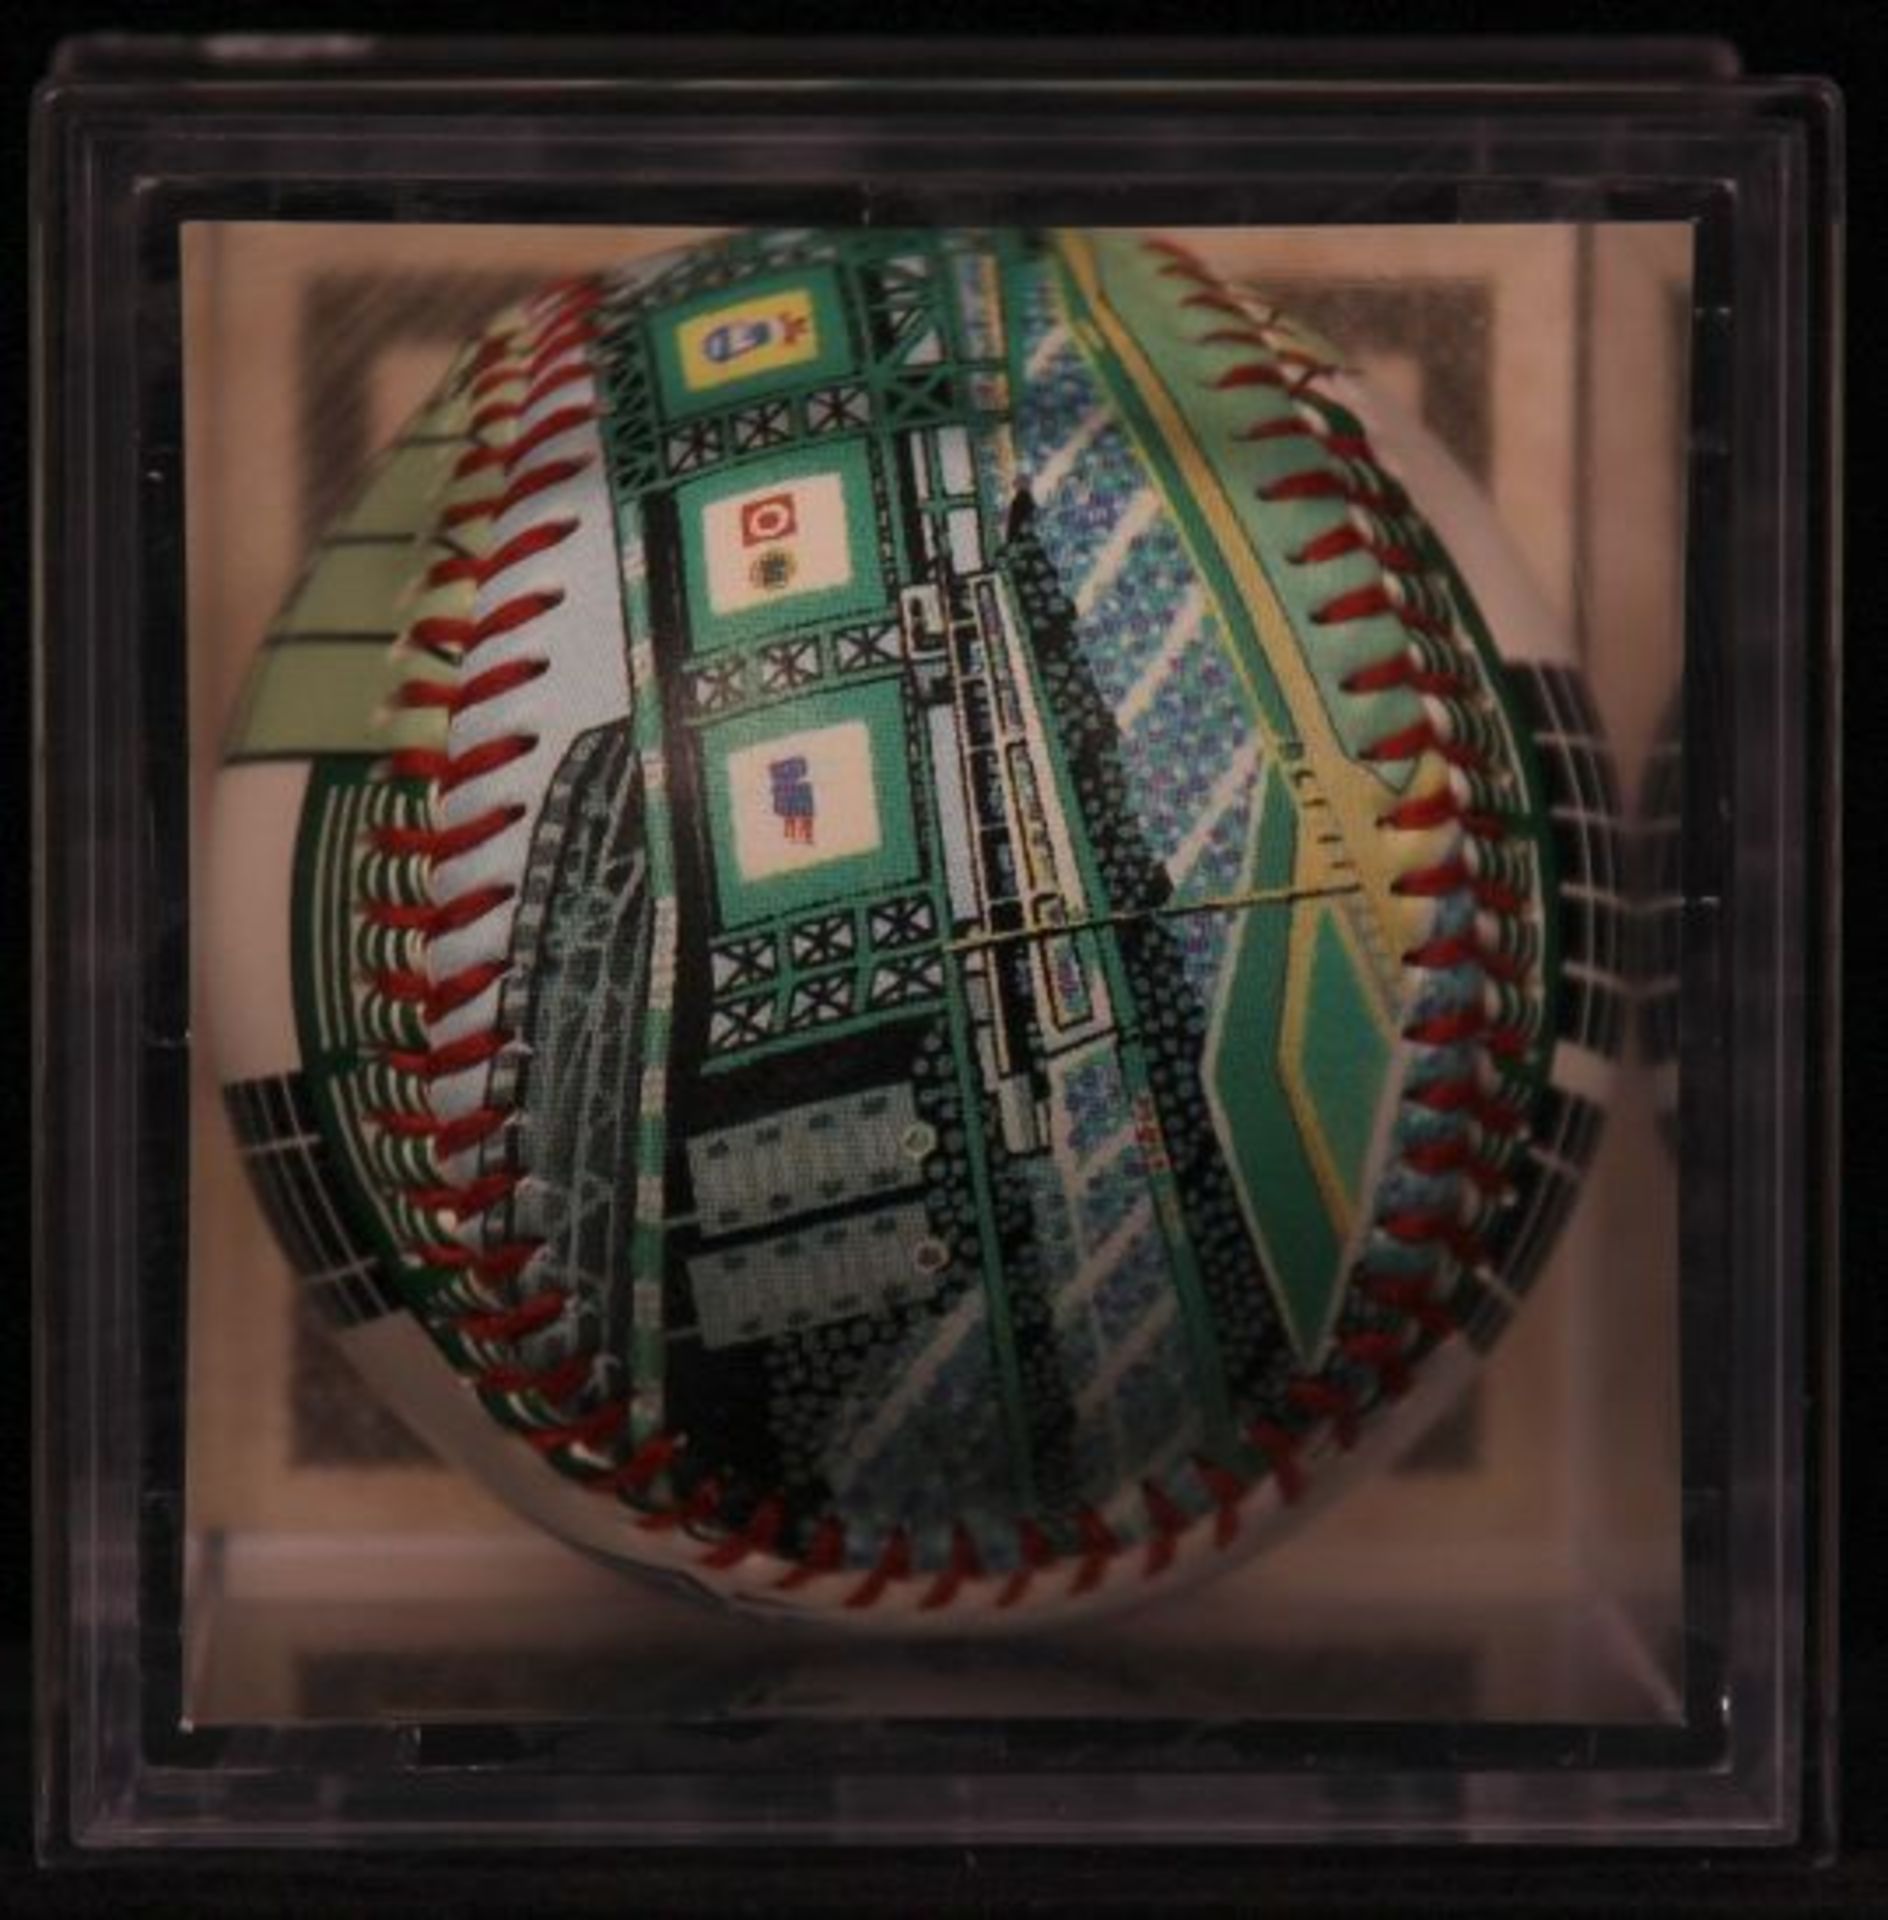 Unforgettaball! "Bank One Ballpark" Collectable Baseball - Image 4 of 6